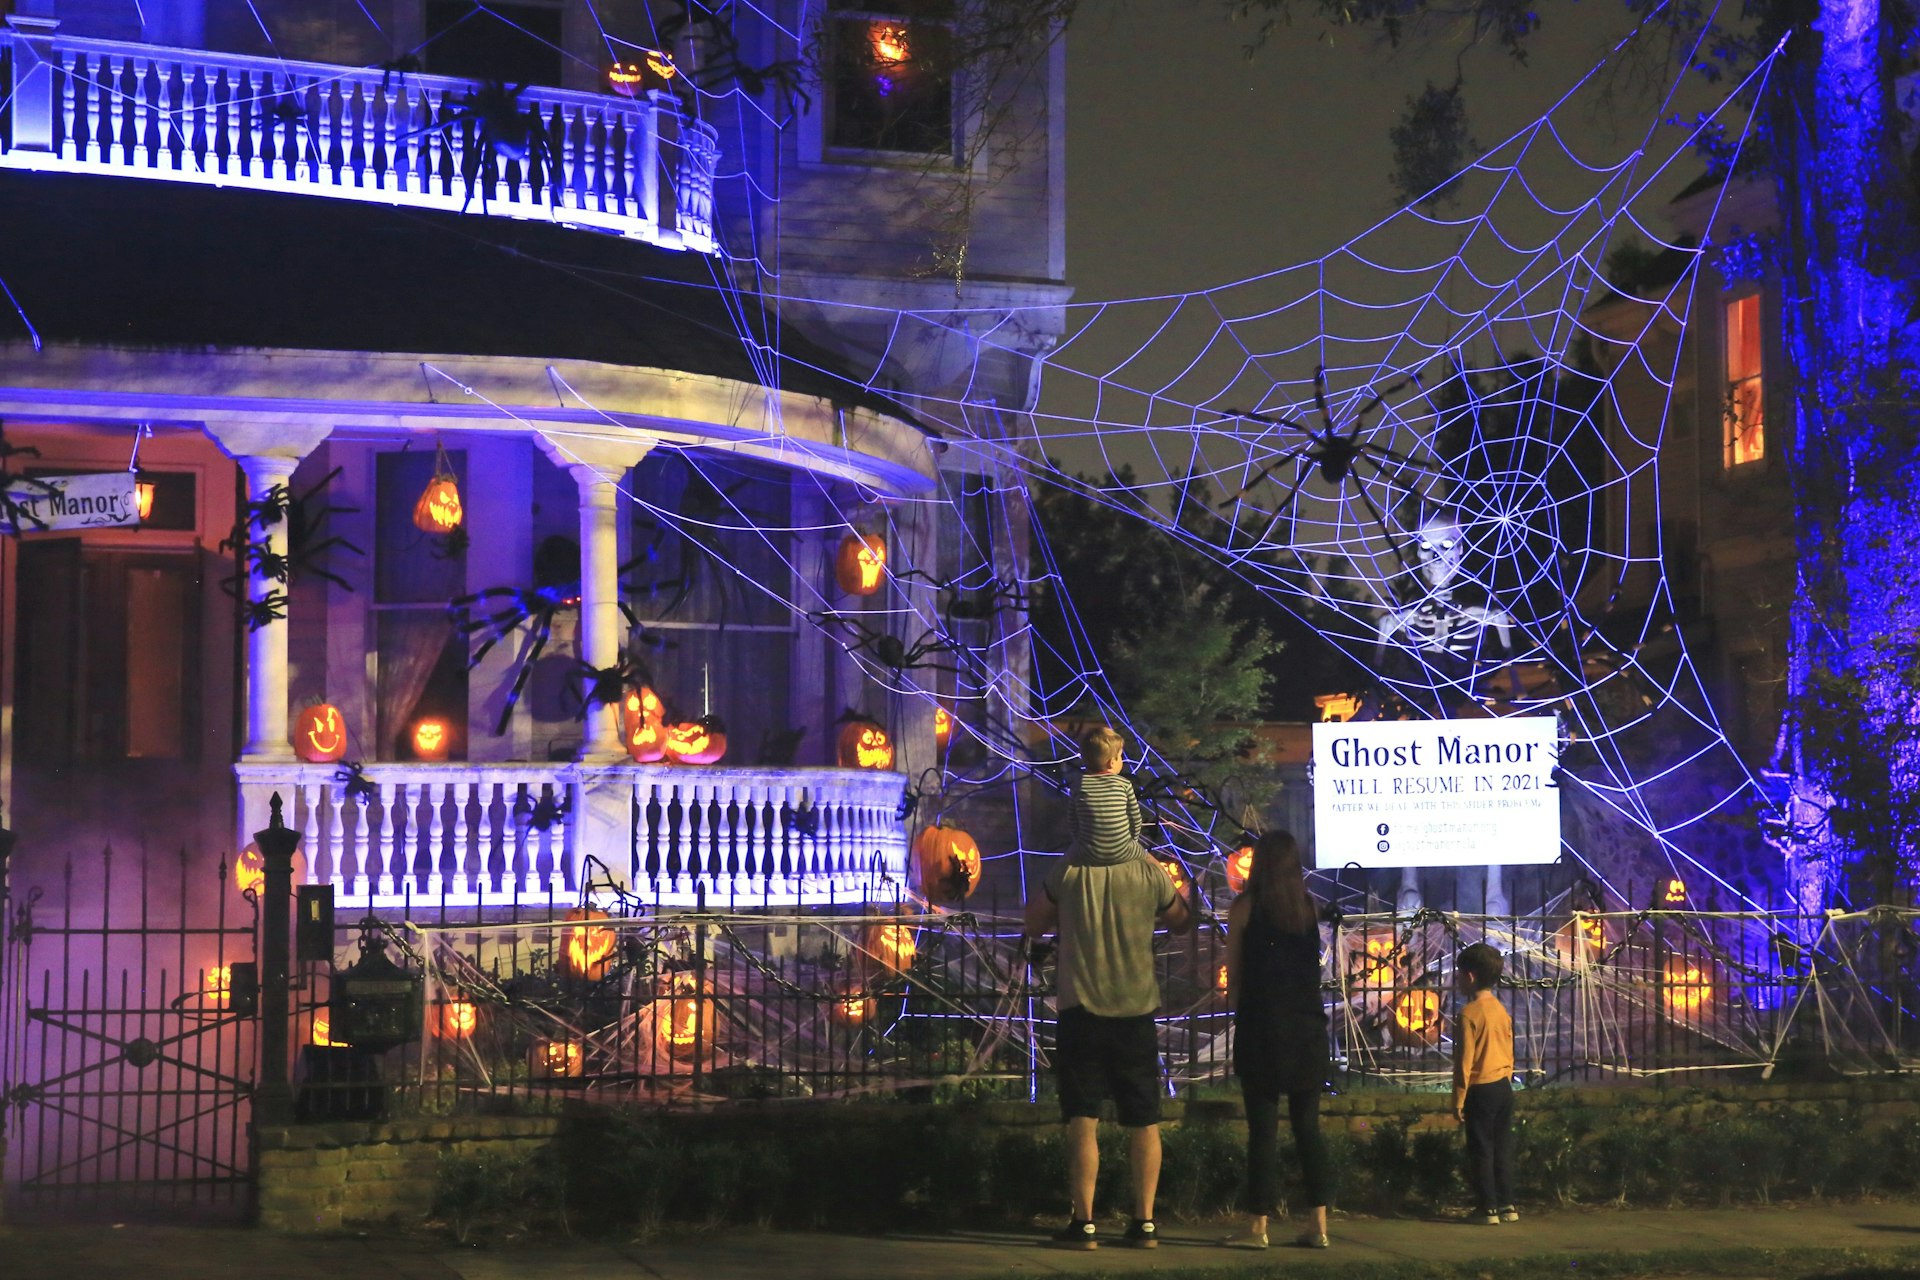 A historic New Orleans mansion decked out for Halloween